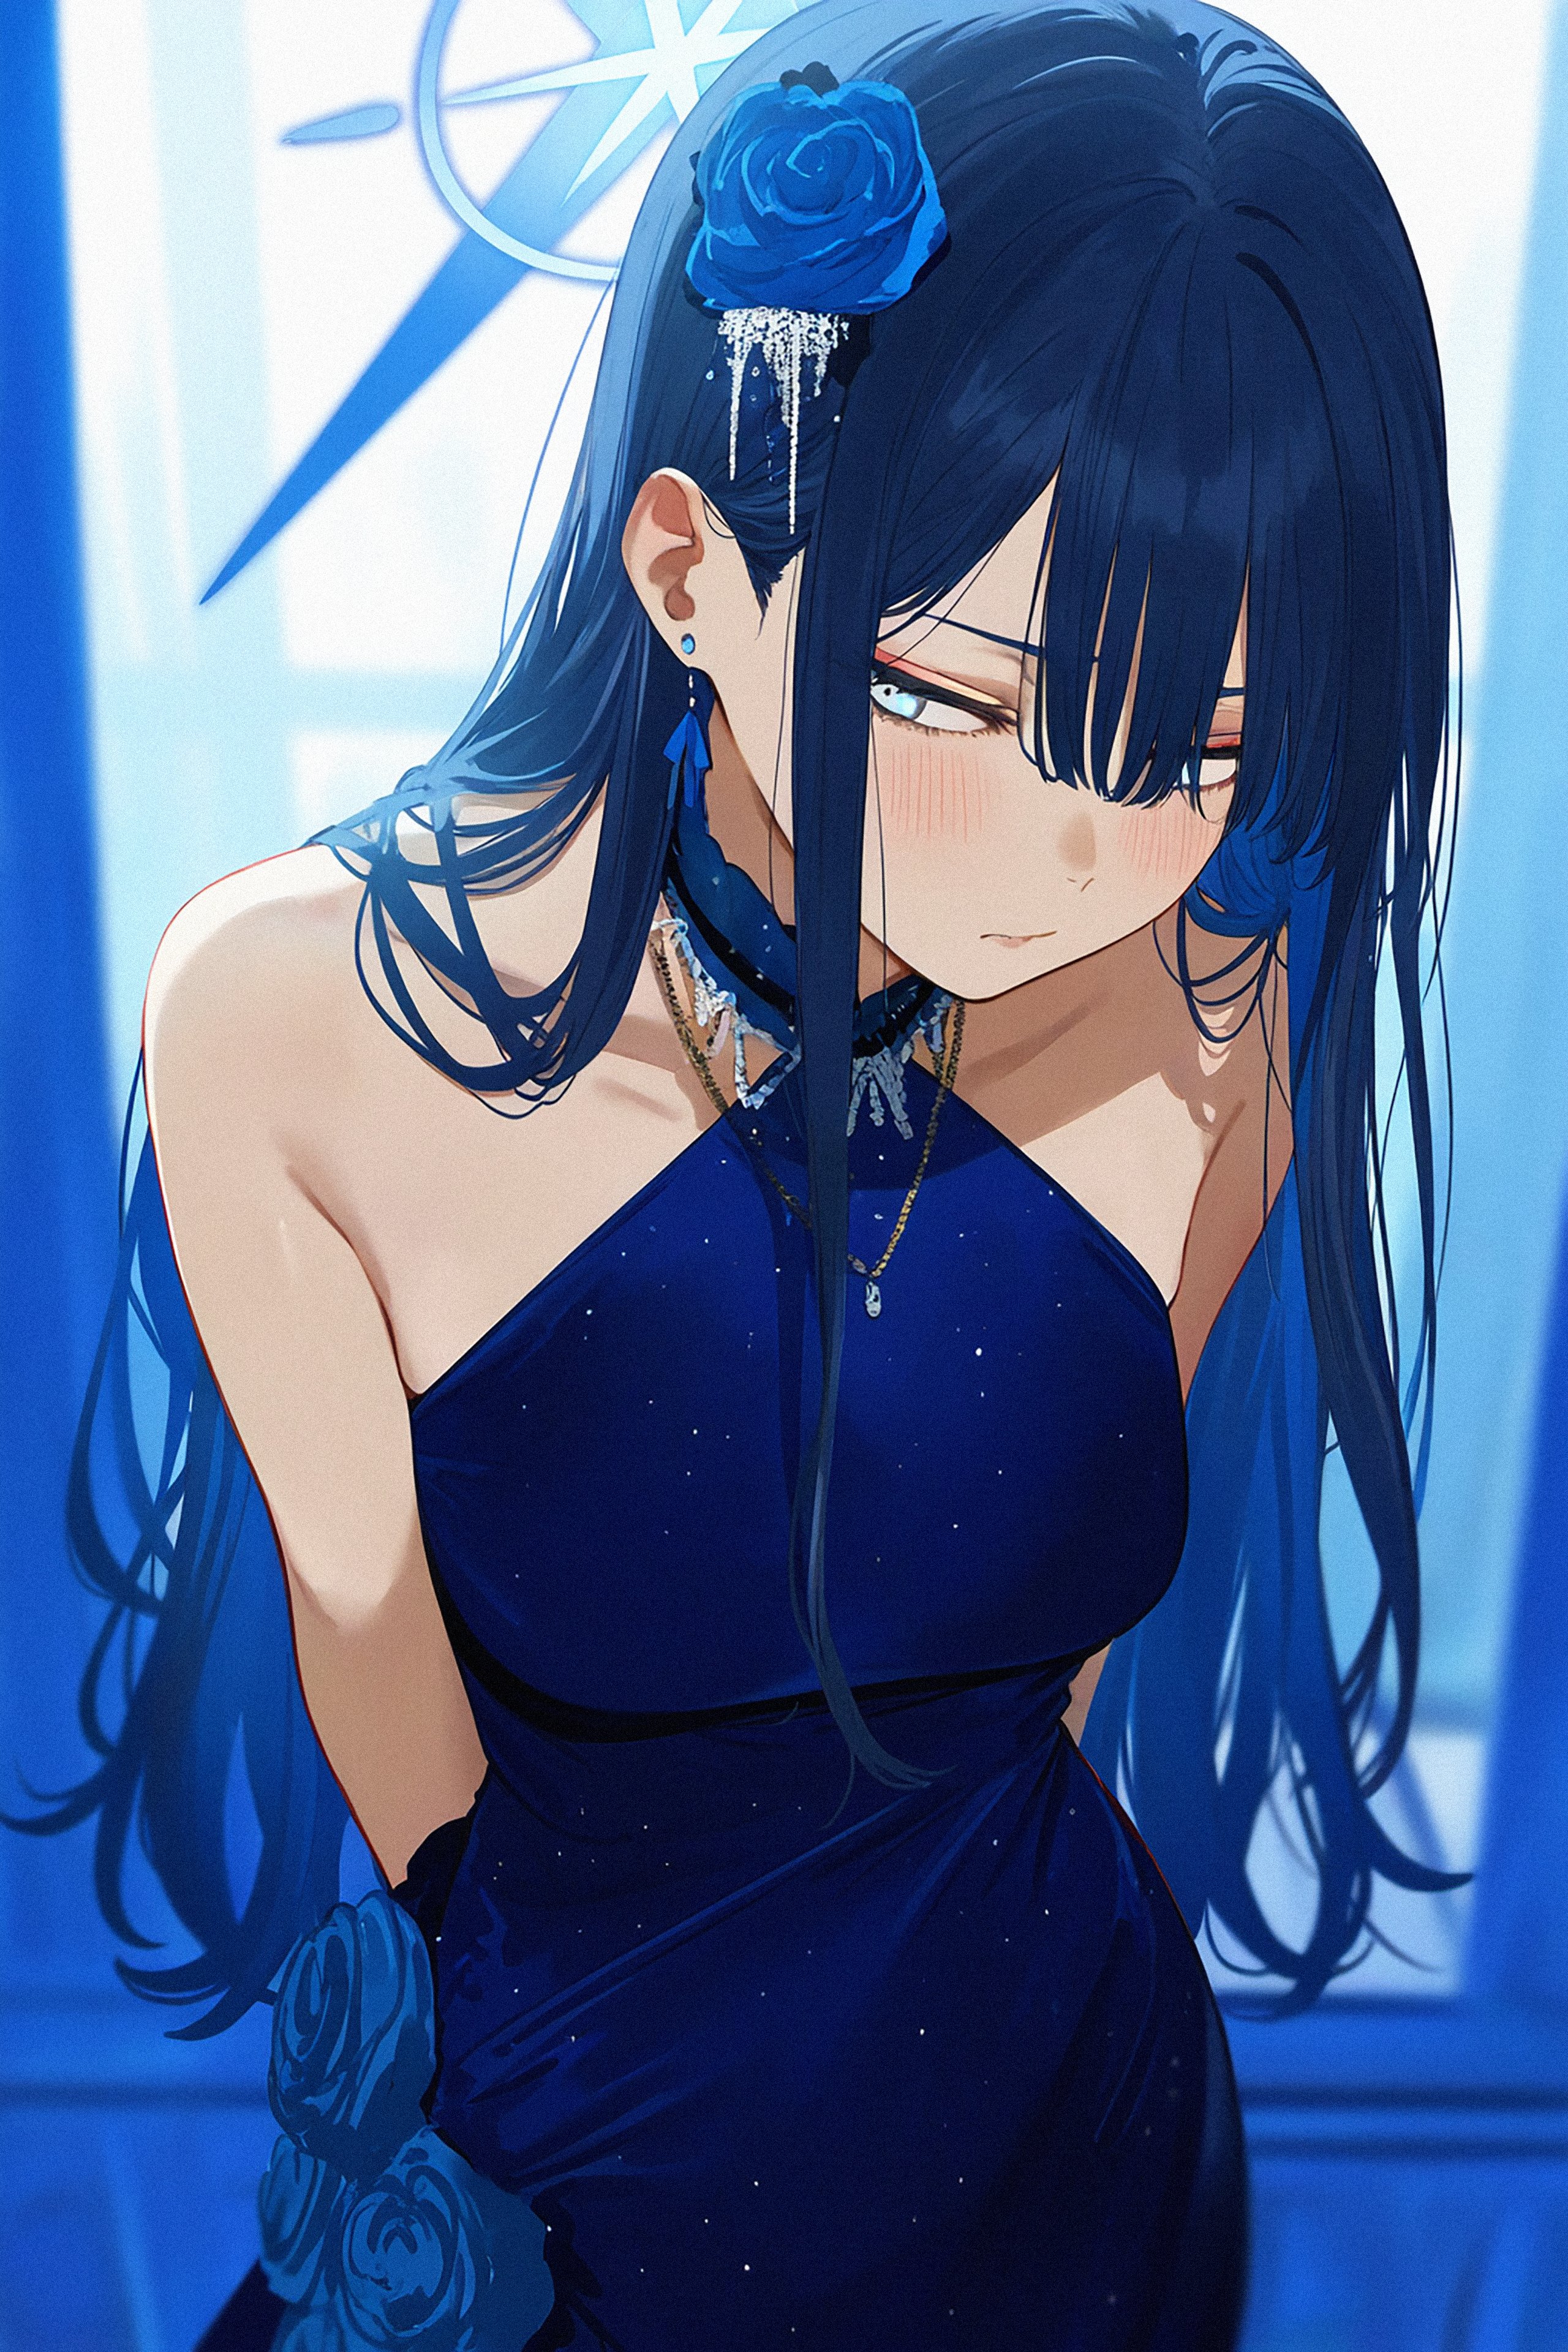 Anime 2560x3840 anime anime girls Saori Joumae Blue Archive Shark lj portrait display looking away long hair blue dress flower in hair closed mouth blue eyes earring bare shoulders collarbone necklace arm(s) behind back dress blue background blue blue rose sleeveless blushing looking sideways